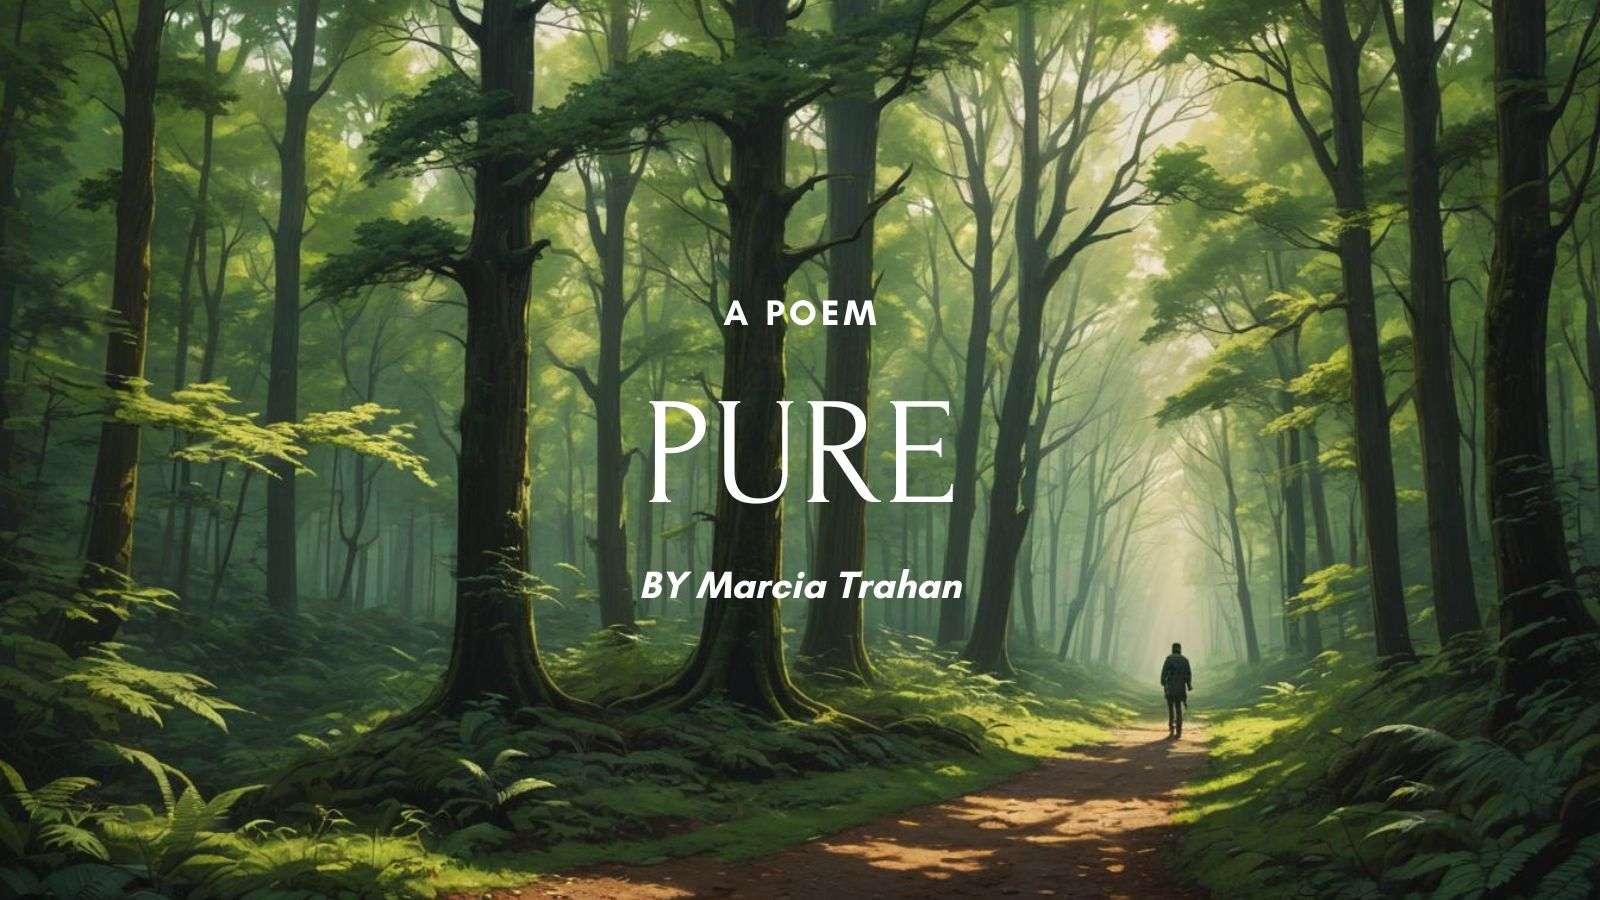 PURE A POEM, a person walking in an idealist forest path